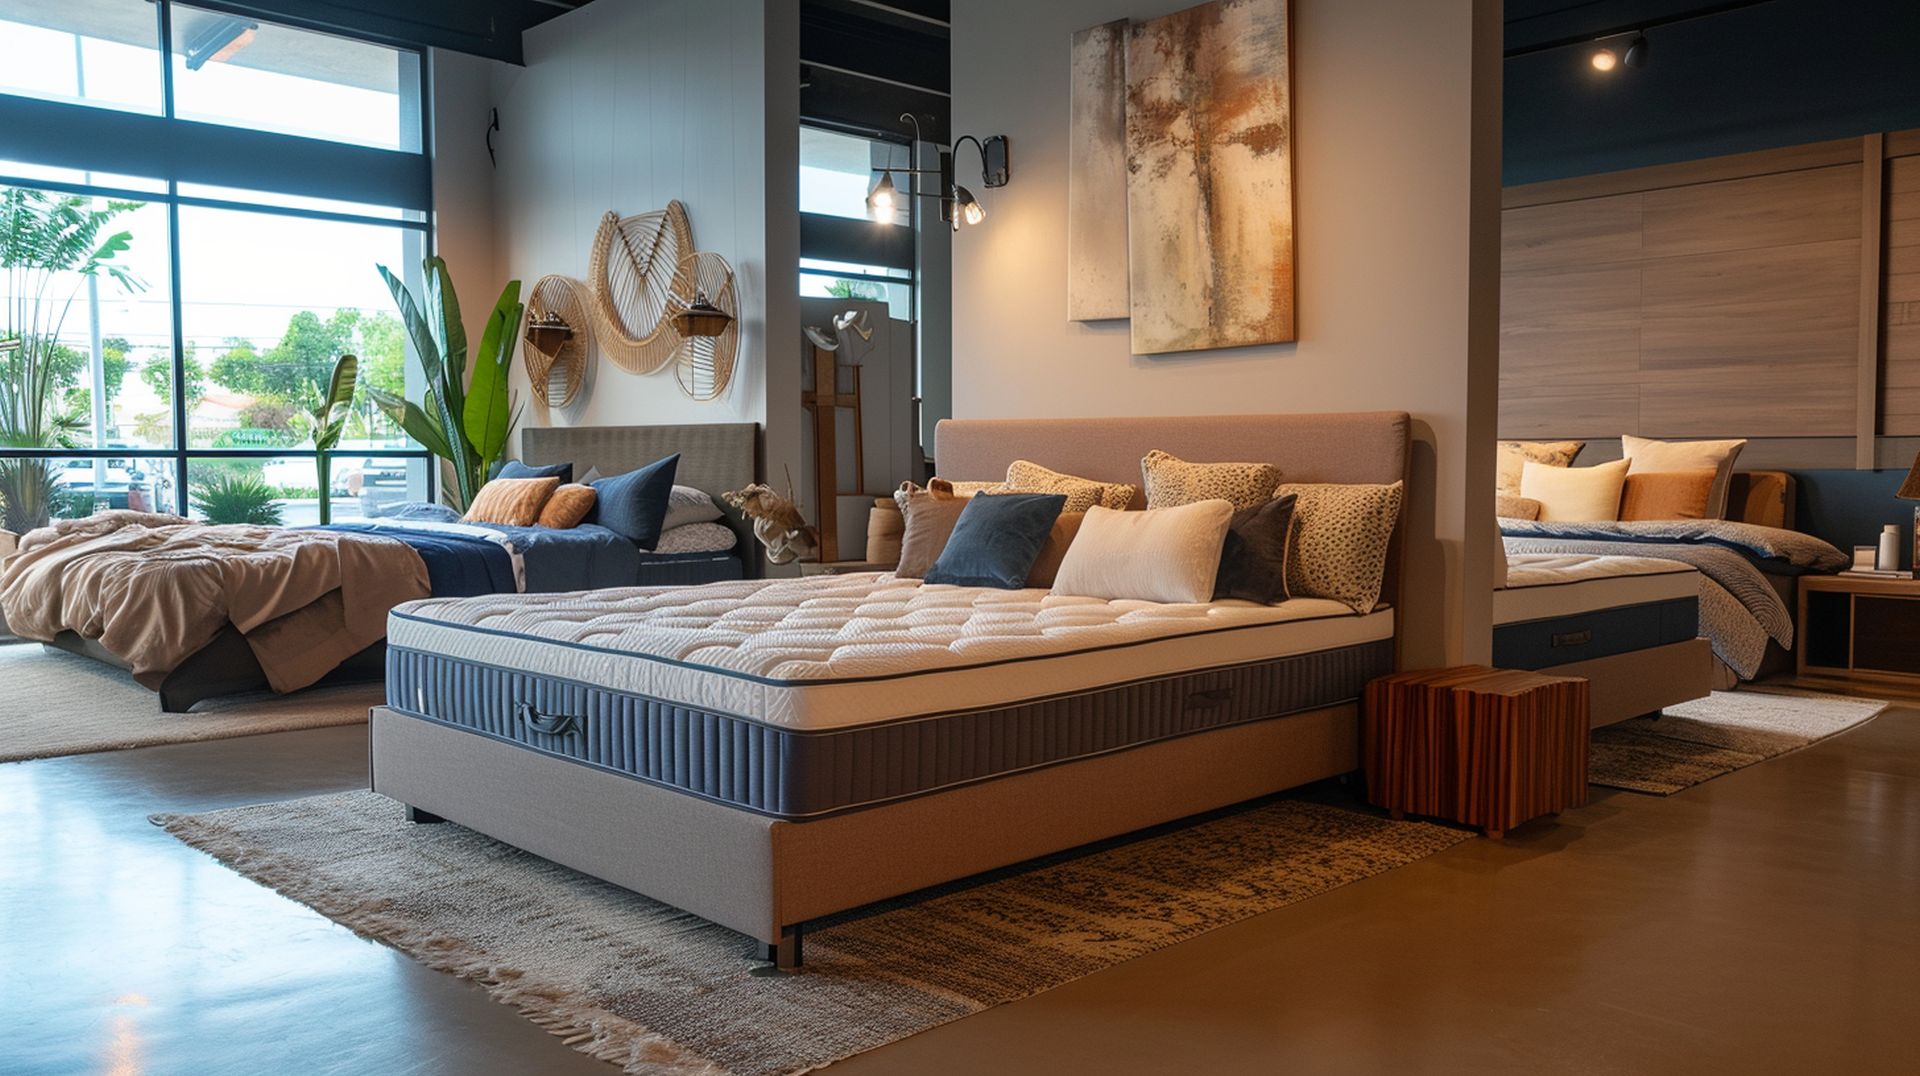 If you're looking for a new bed, mattress stores in Killeen offer the best customer and delivery service, financing, and warranties in Texas